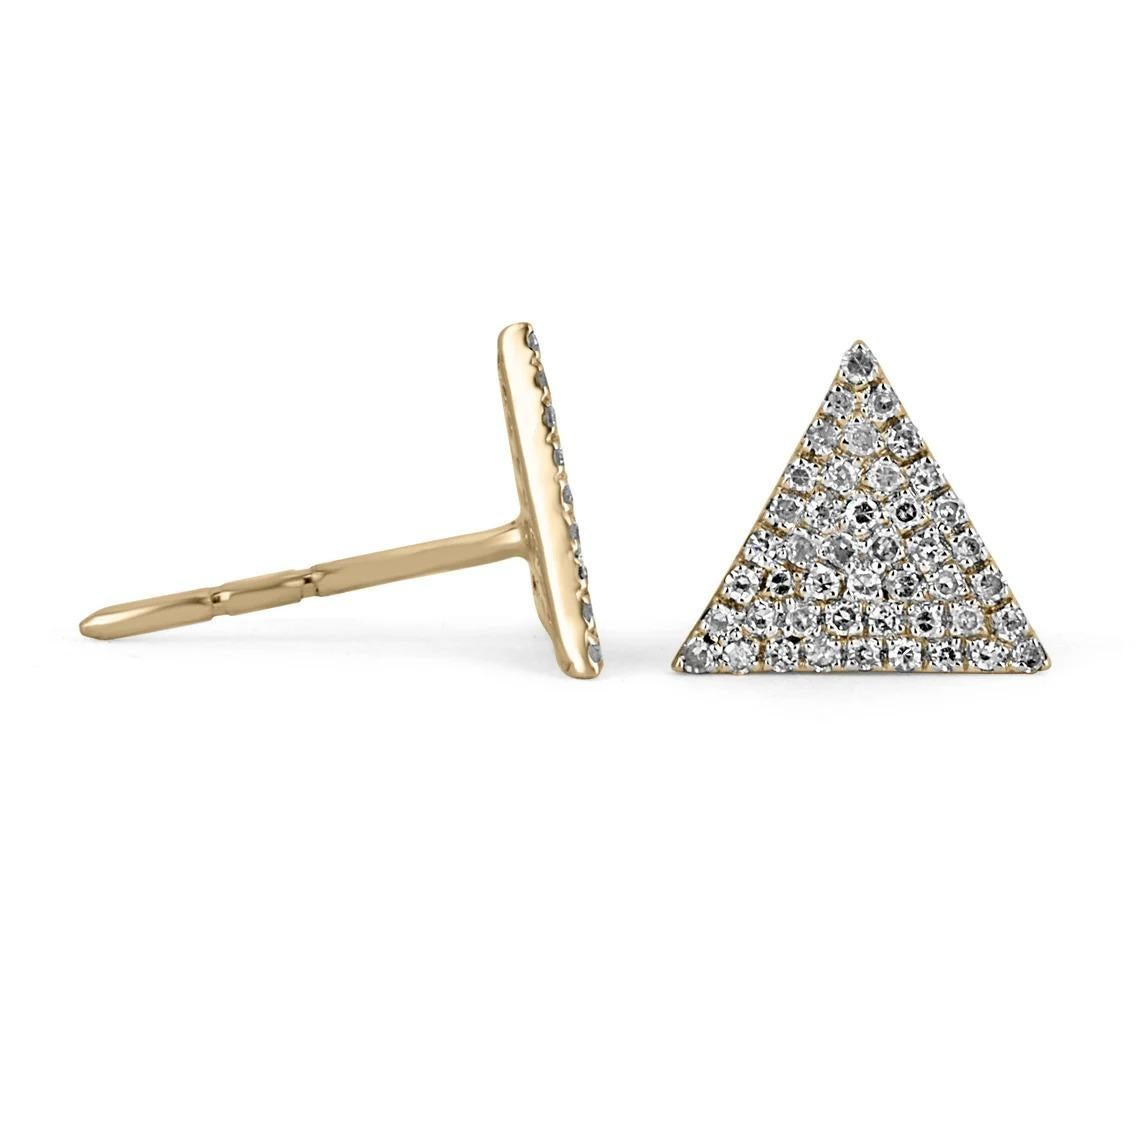 A stylish pair of triangle, diamond cluster, stud earrings. 0.27-carats of beautiful, bright, brilliant-cut diamonds pave set in a 14K yellow gold, triangle setting. Perfect everyday use.

Metal Purity: 14K Yellow Gold
Metal Weight: 1.2